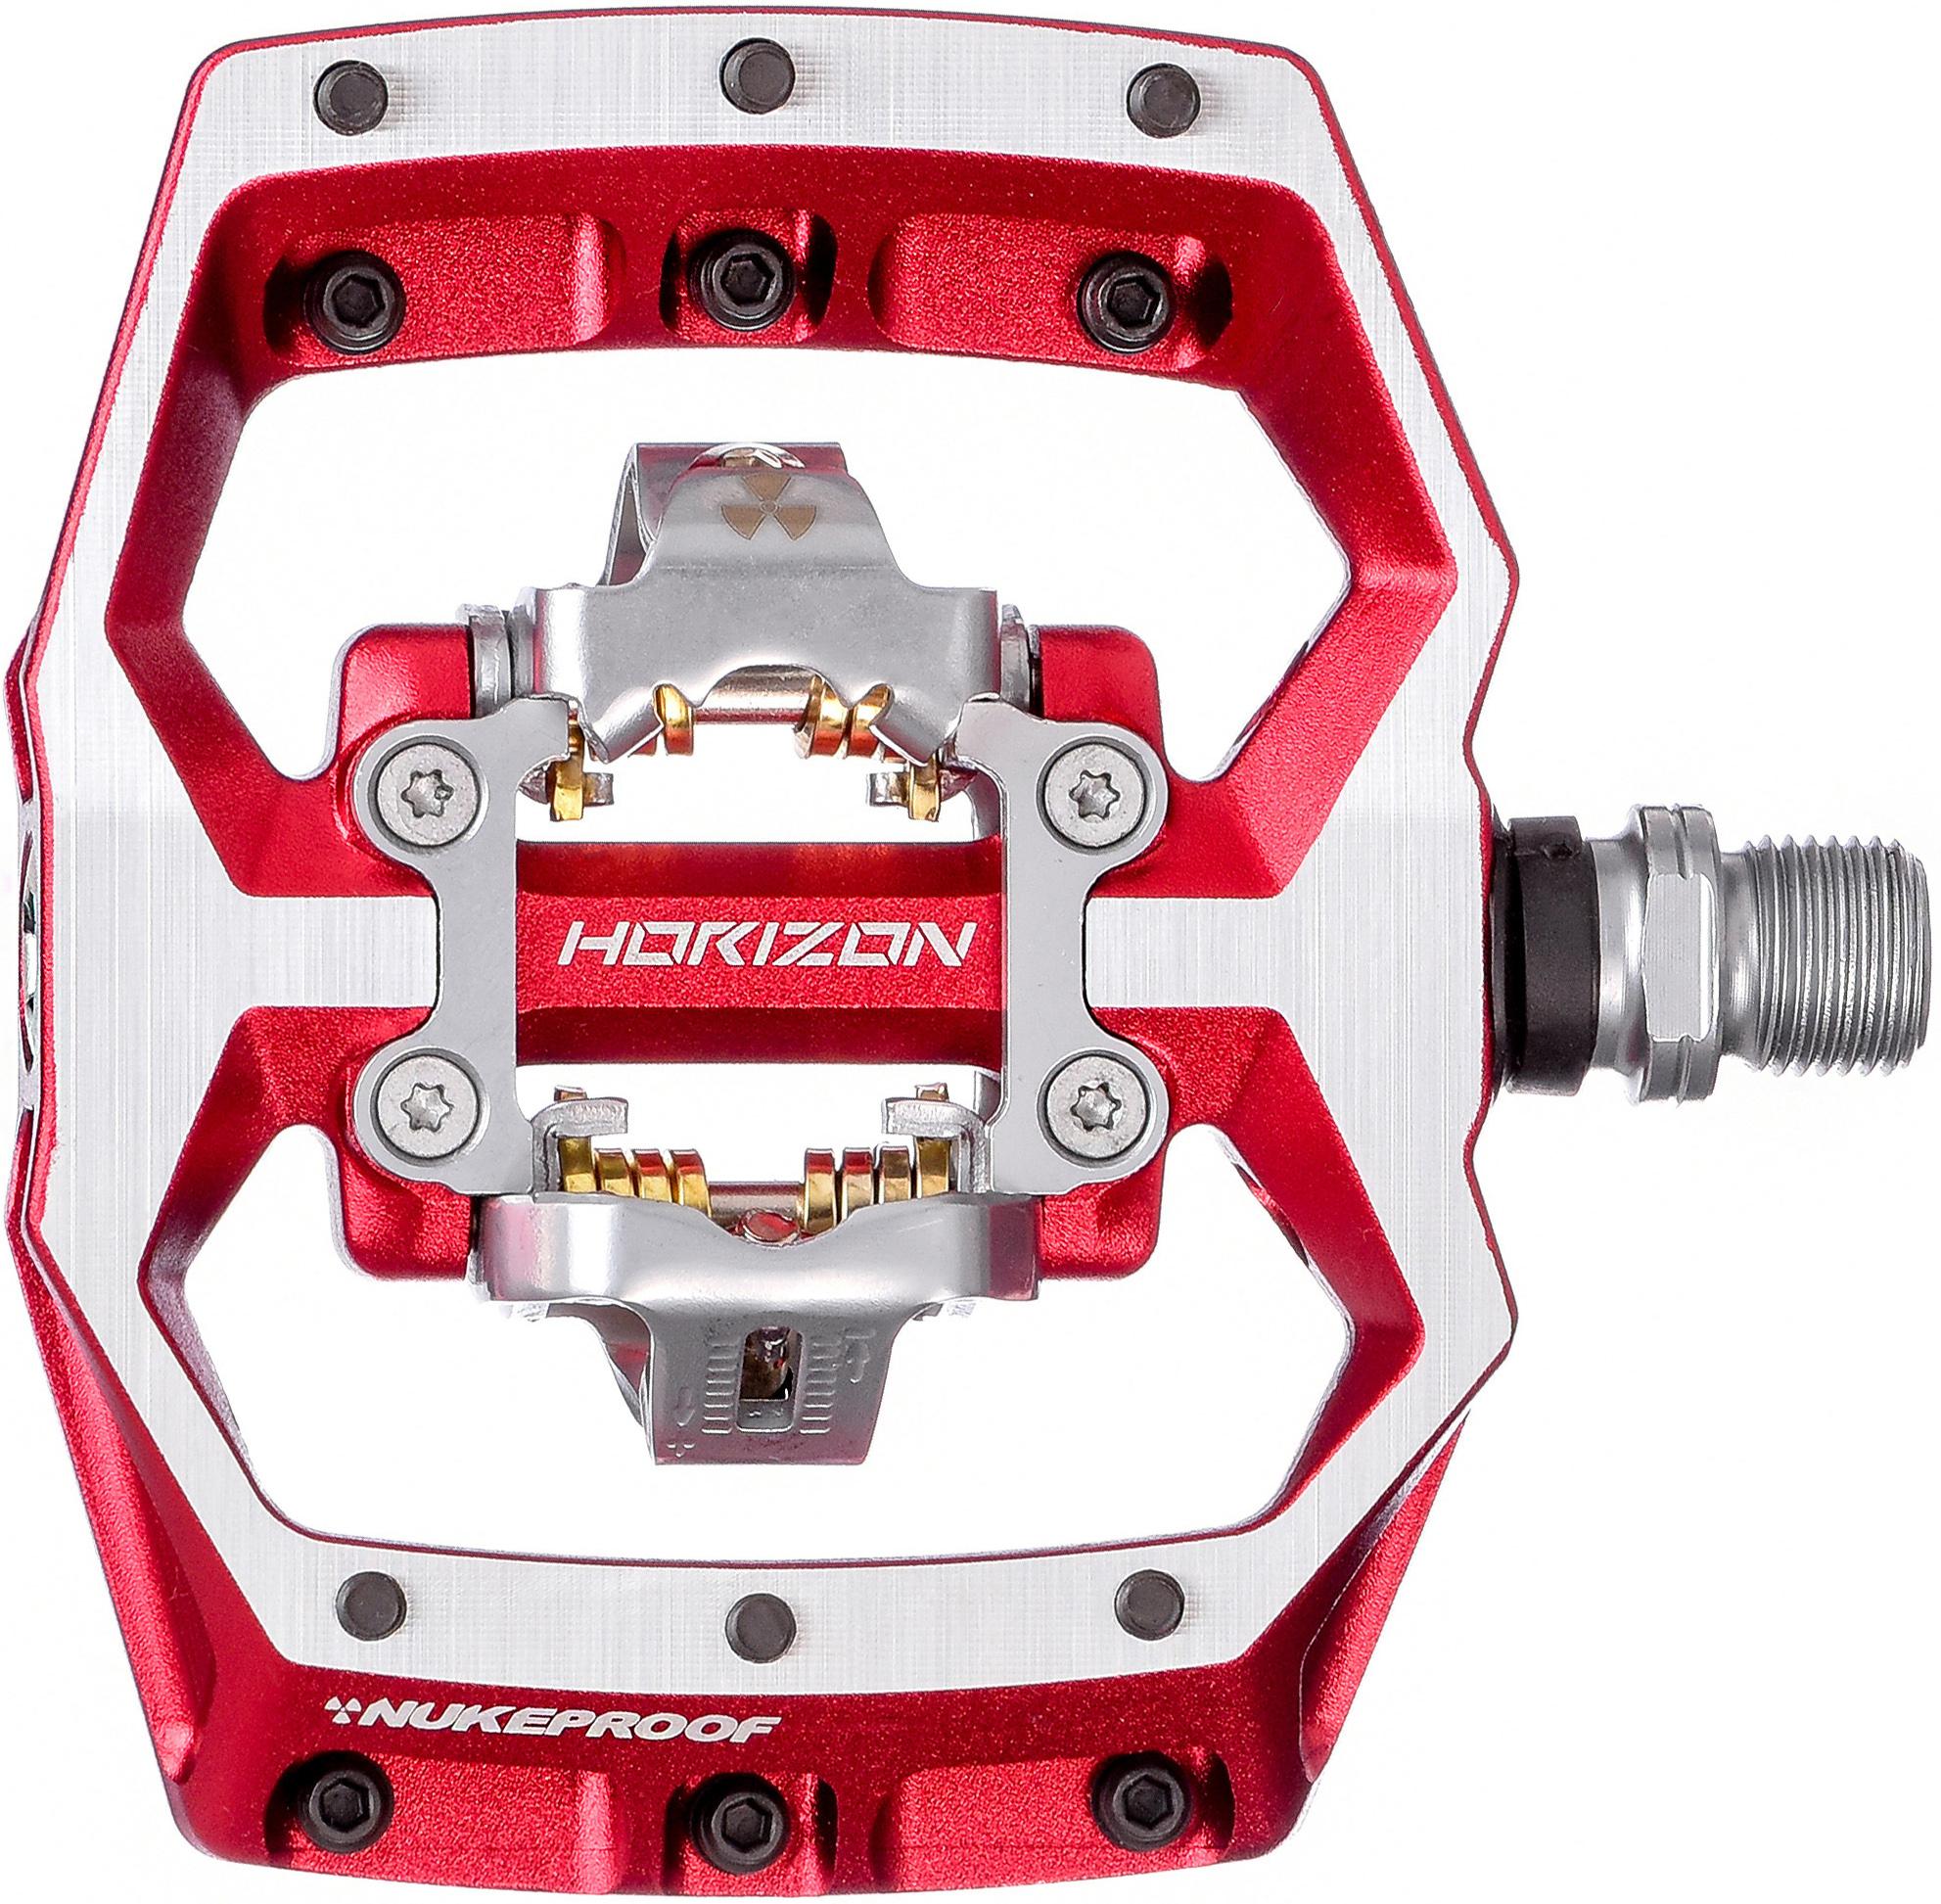 Nukeproof Horizon Cl Crmo Downhill Pedals  Red